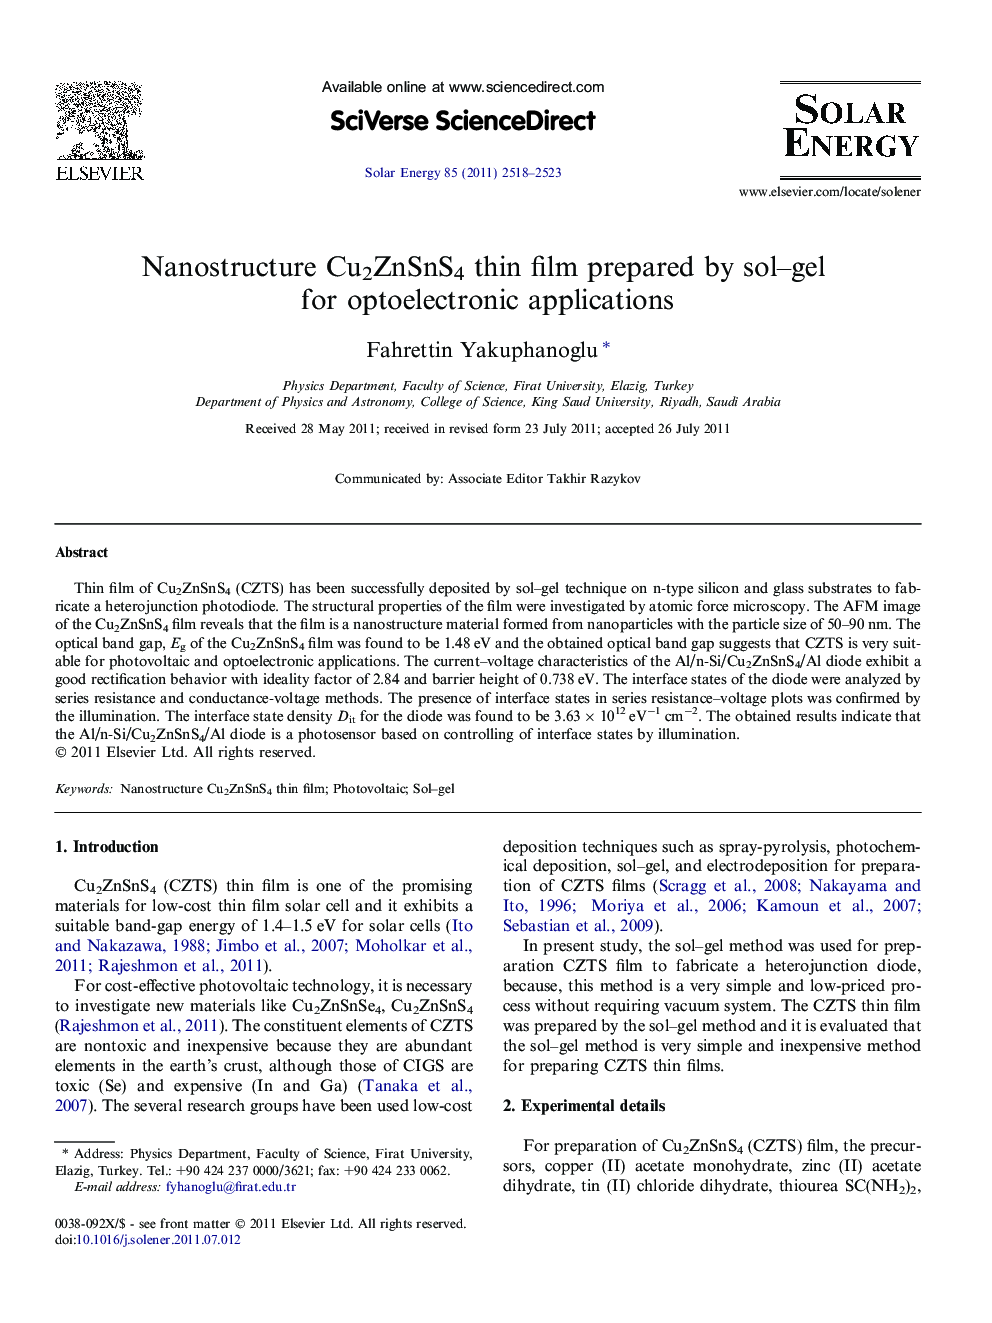 Nanostructure Cu2ZnSnS4 thin film prepared by sol-gel for optoelectronic applications